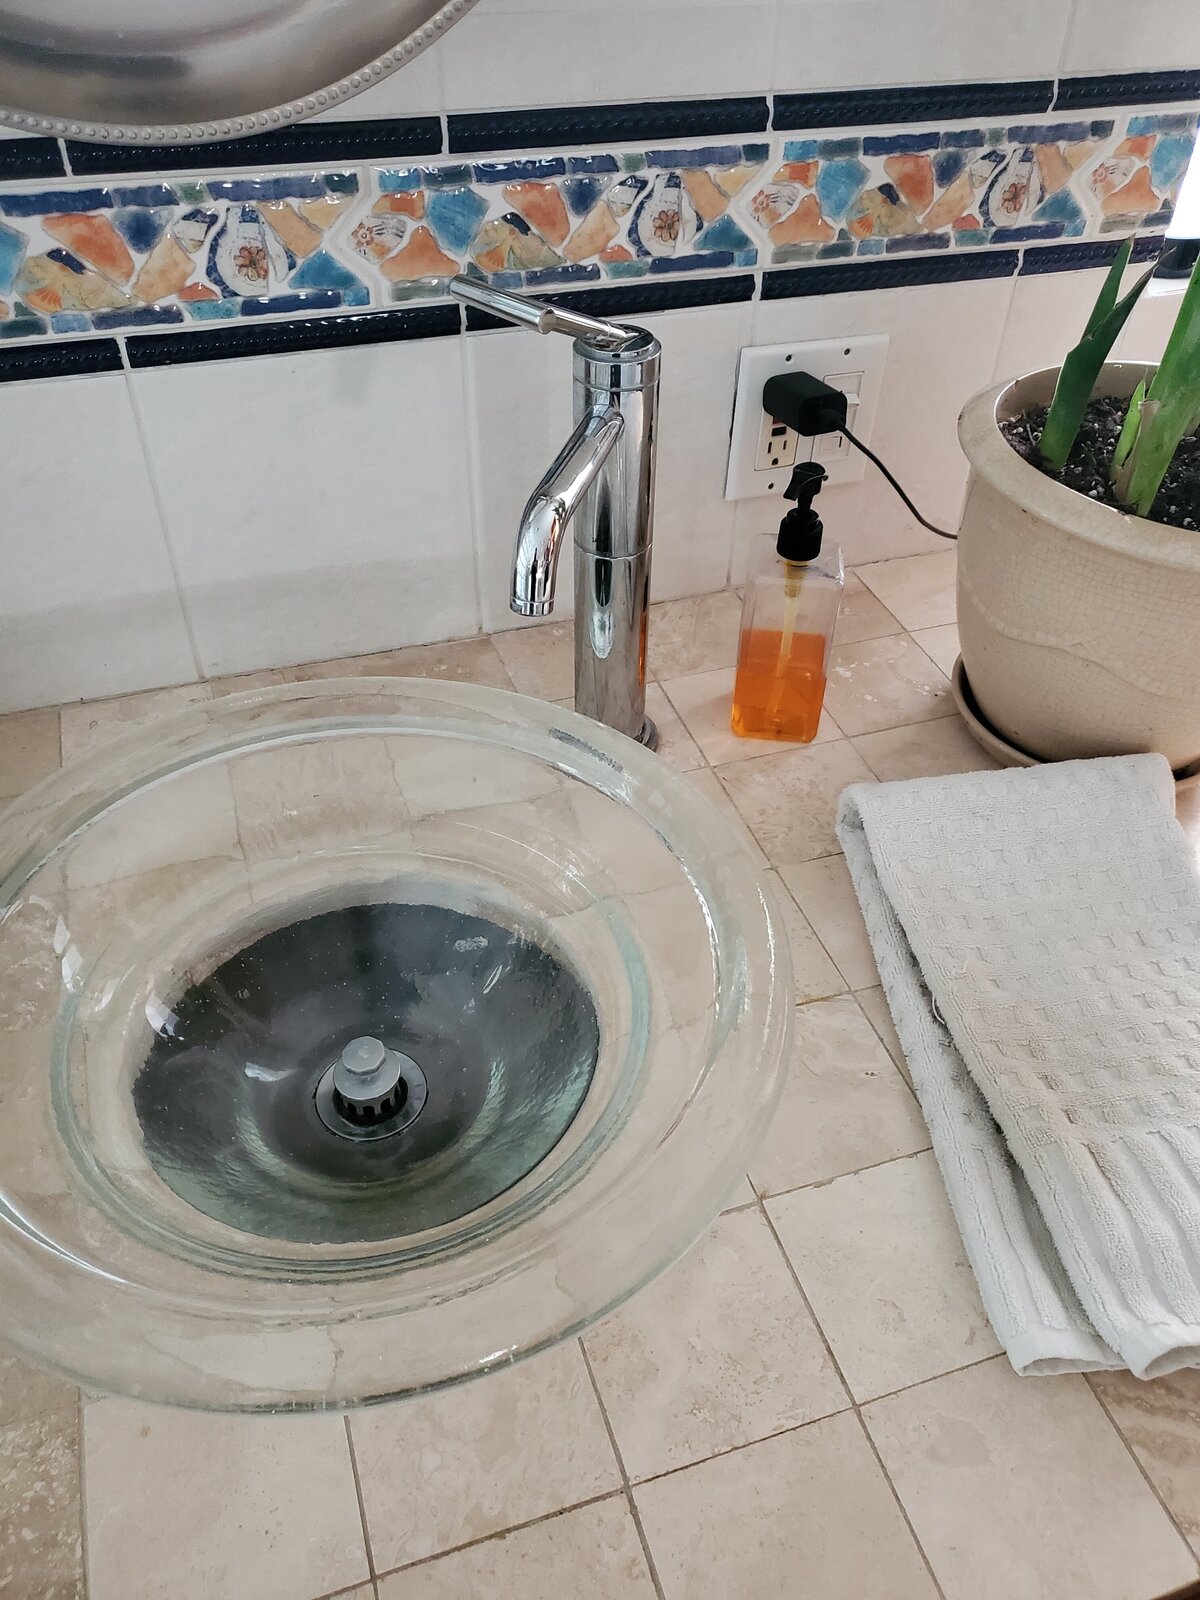 Sink Replacement in Bathroom